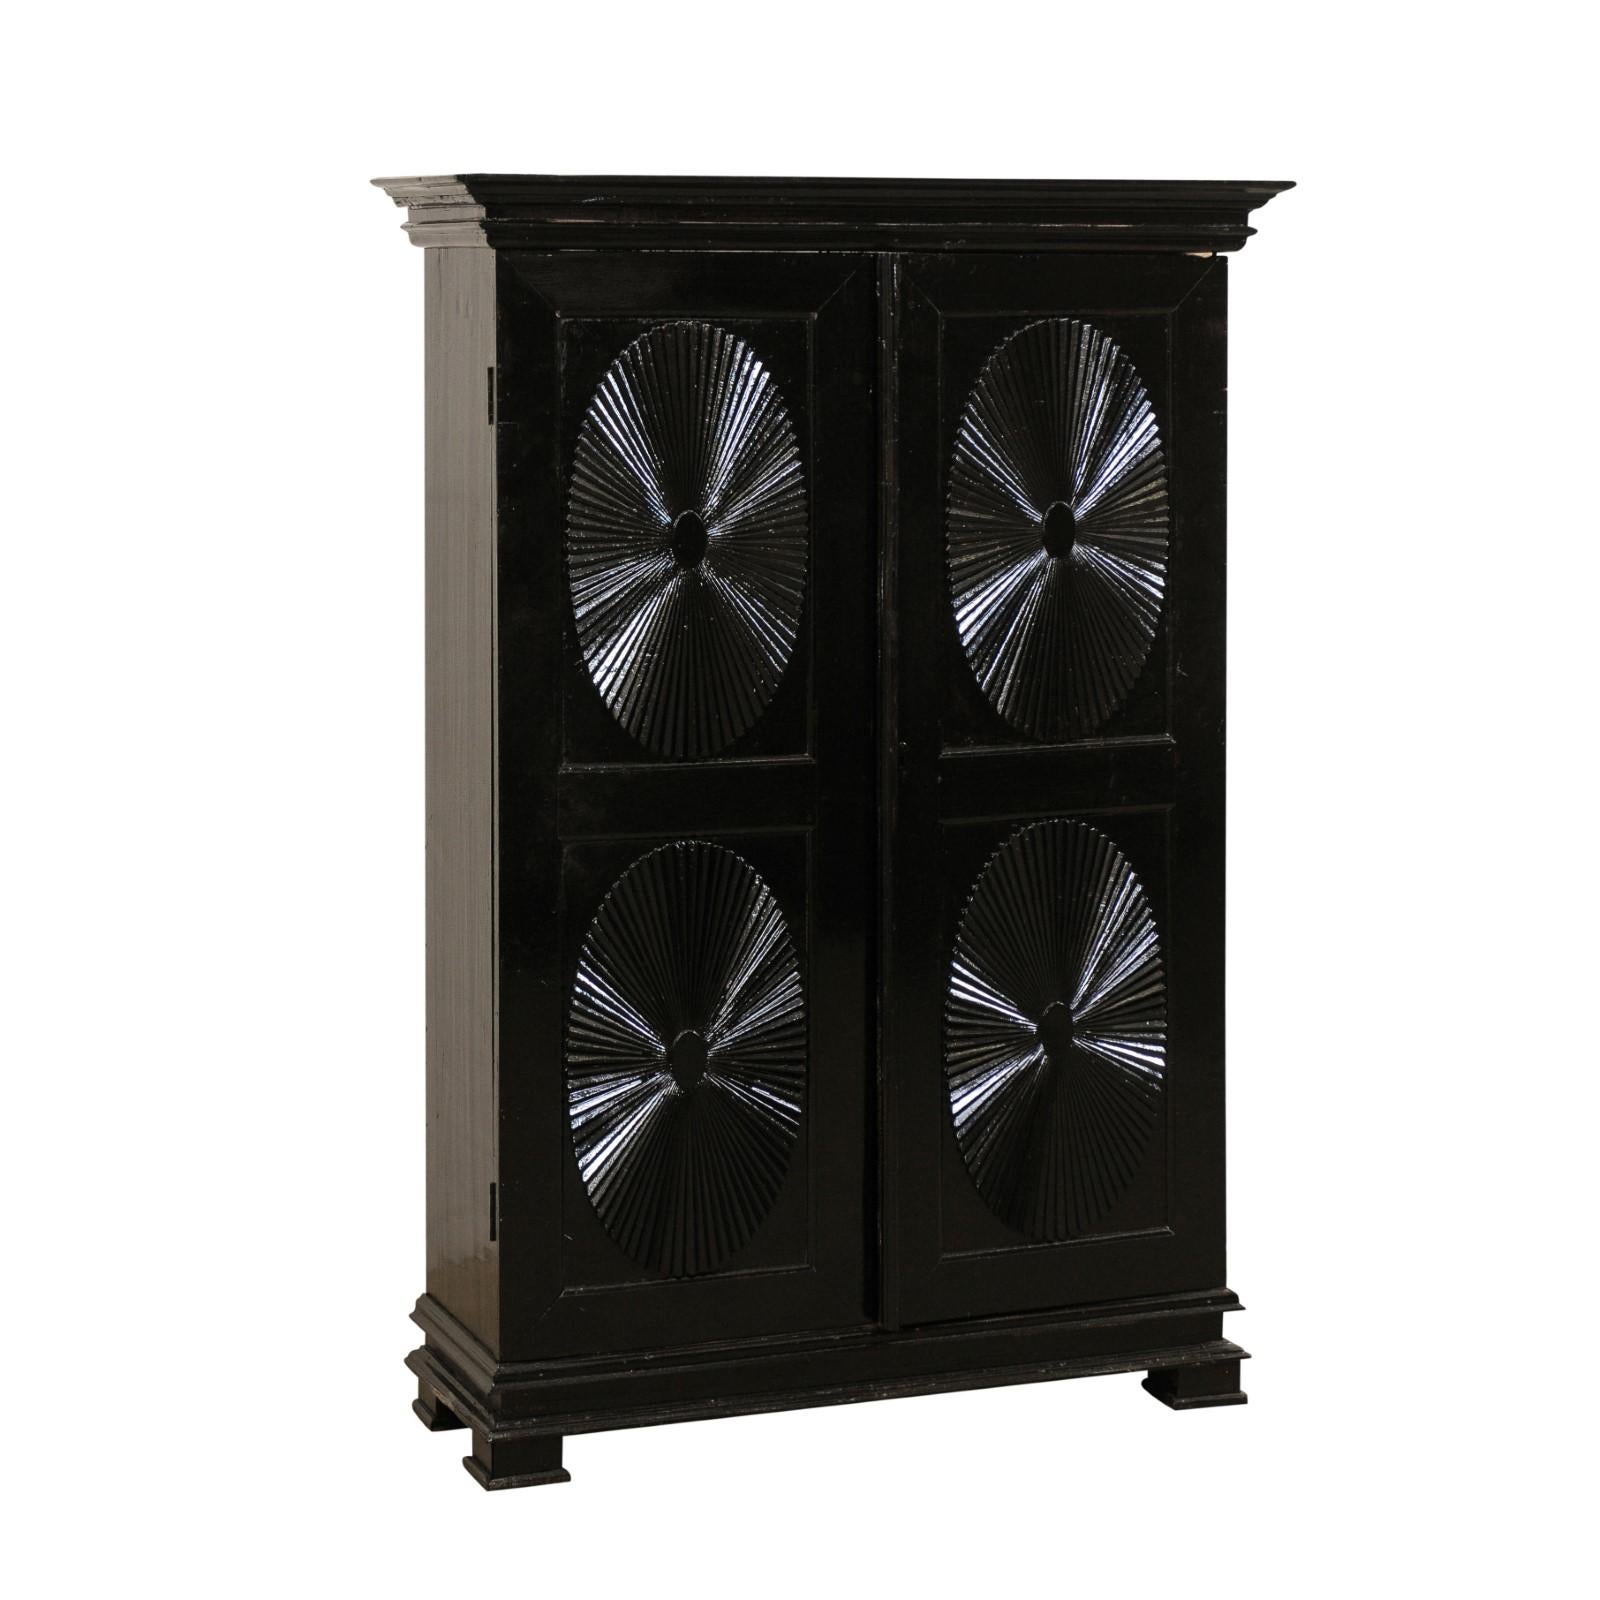 A British Colonial decoratively paneled two-door storage cabinet from the turn of the 19th and 20th century. This antique cabinet from India features a pair of tall raised-panel doors, each adorn with two fan-carved ovals, one atop the other, and